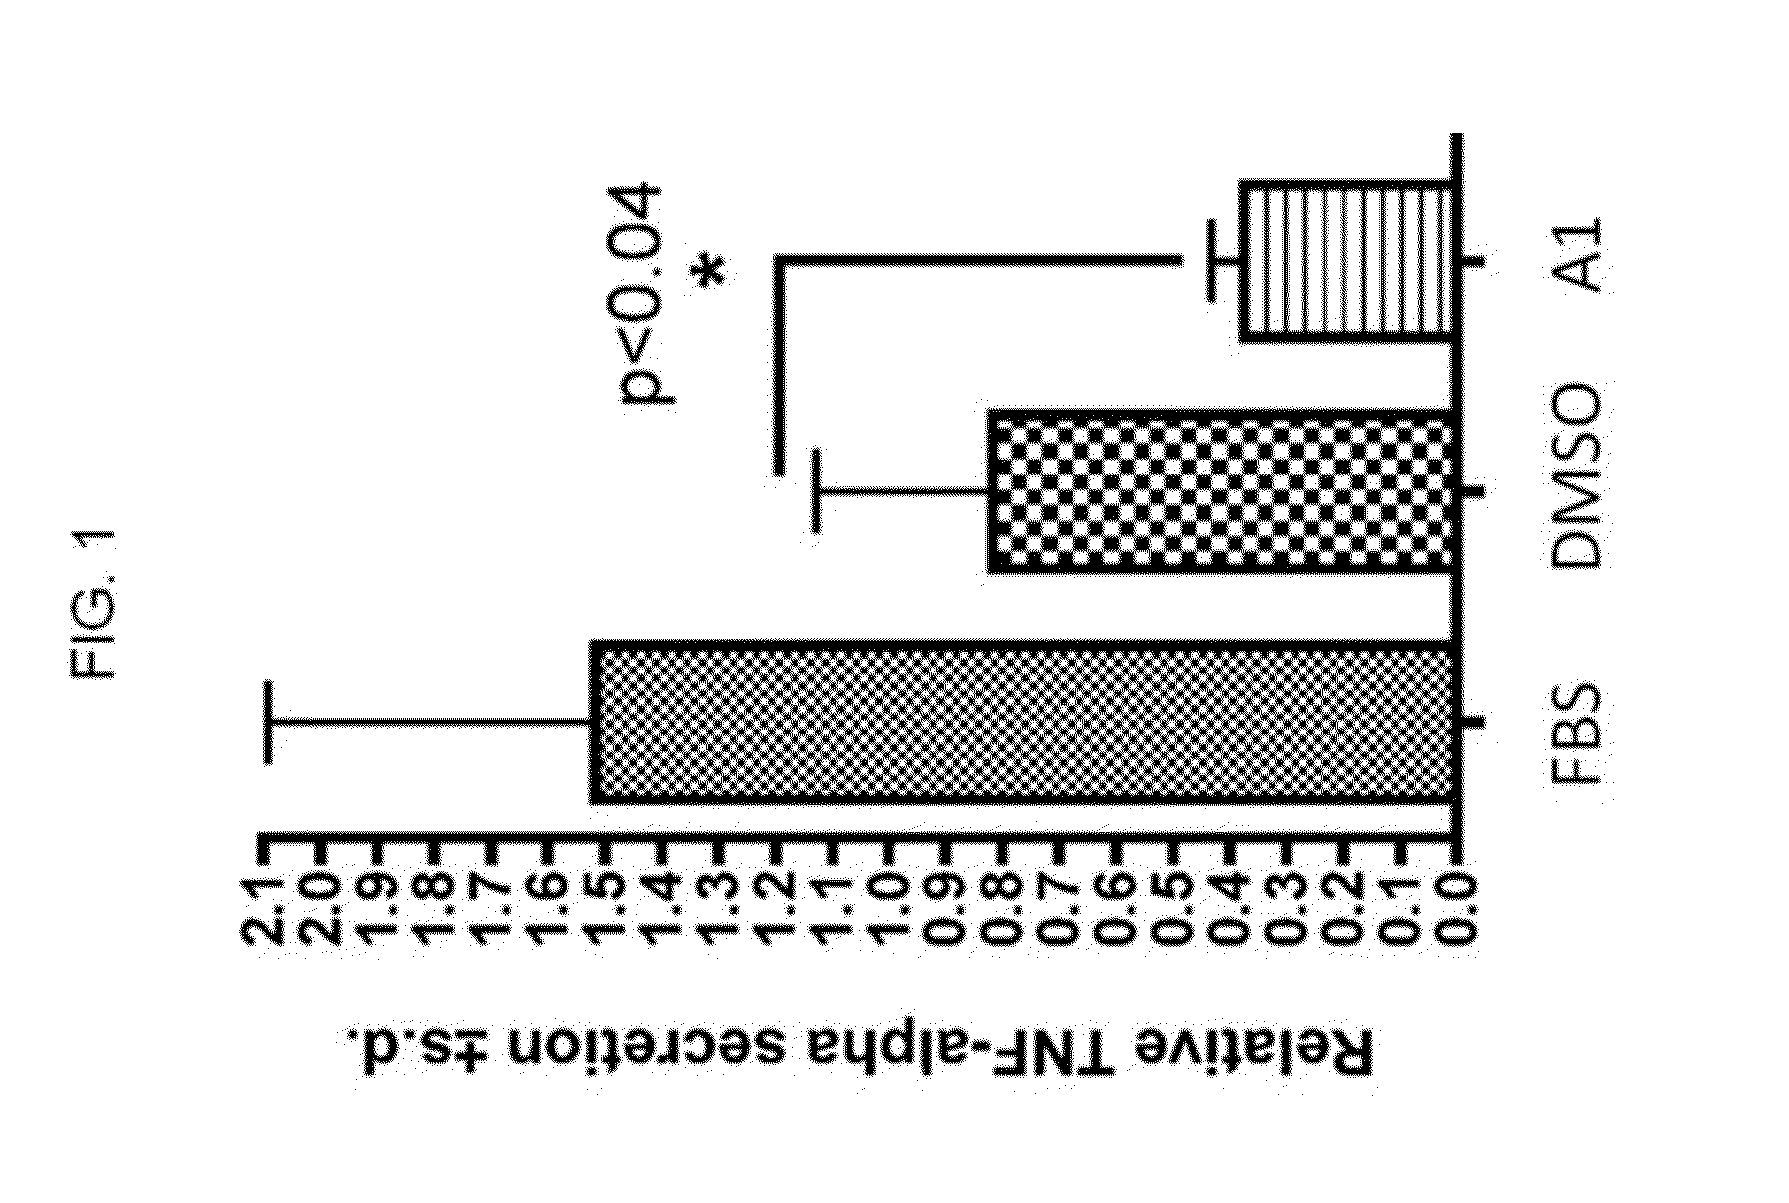 Hydroxypyridone derivatives, pharmaceutical compositions thereof, and their therapeutic use for treating inflammatory, neurodegenerative, or immune-mediated diseases